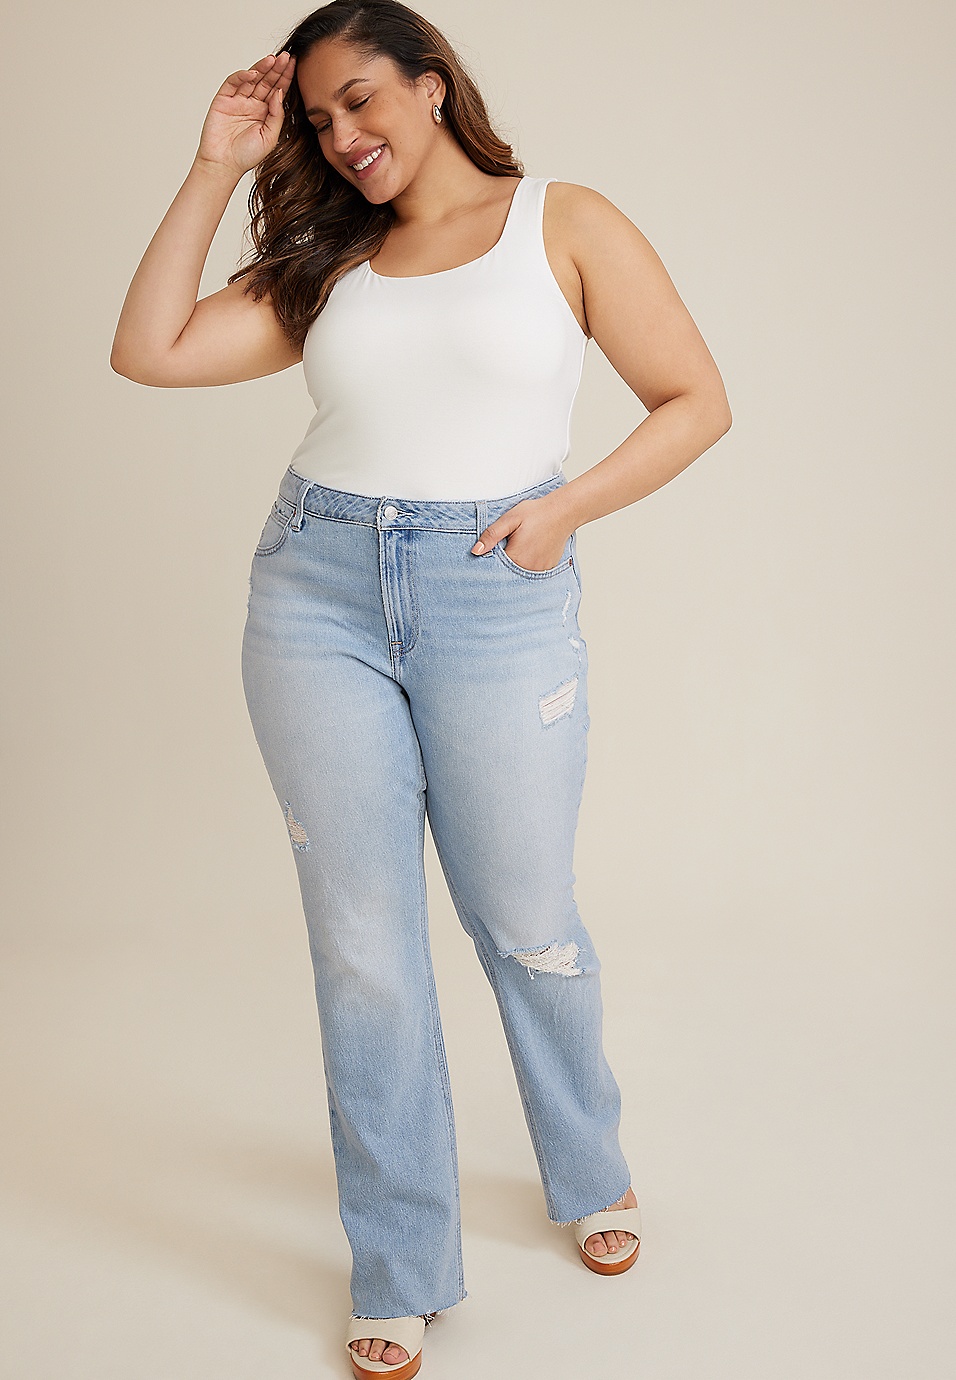 Plus Size Goldie Blues™ Light Curvy High Rise Cheeky Slim Boot Jean